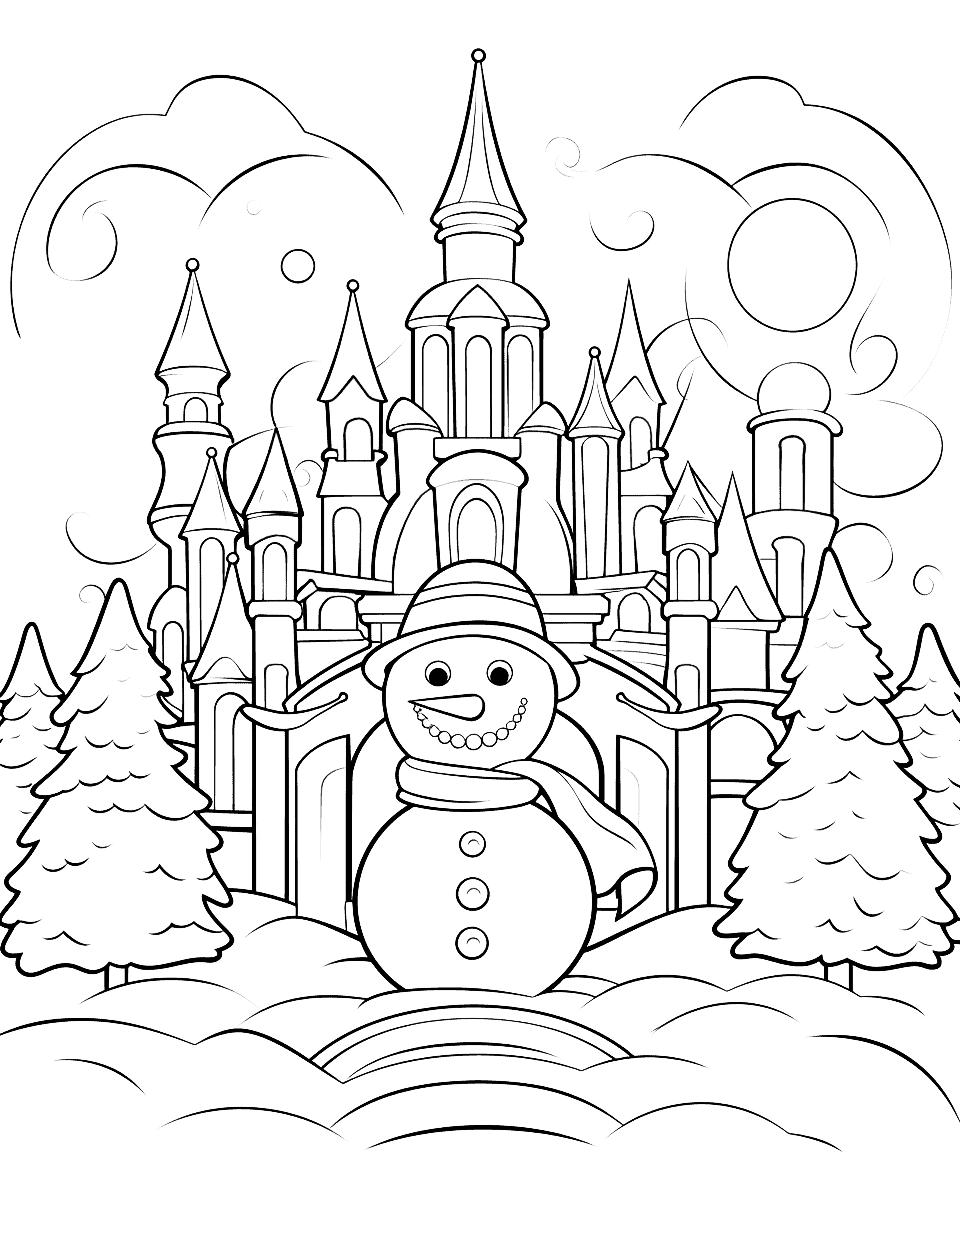 Crayola Ice Palace Winter Coloring Page - A grand ice palace waiting to be filled with color.